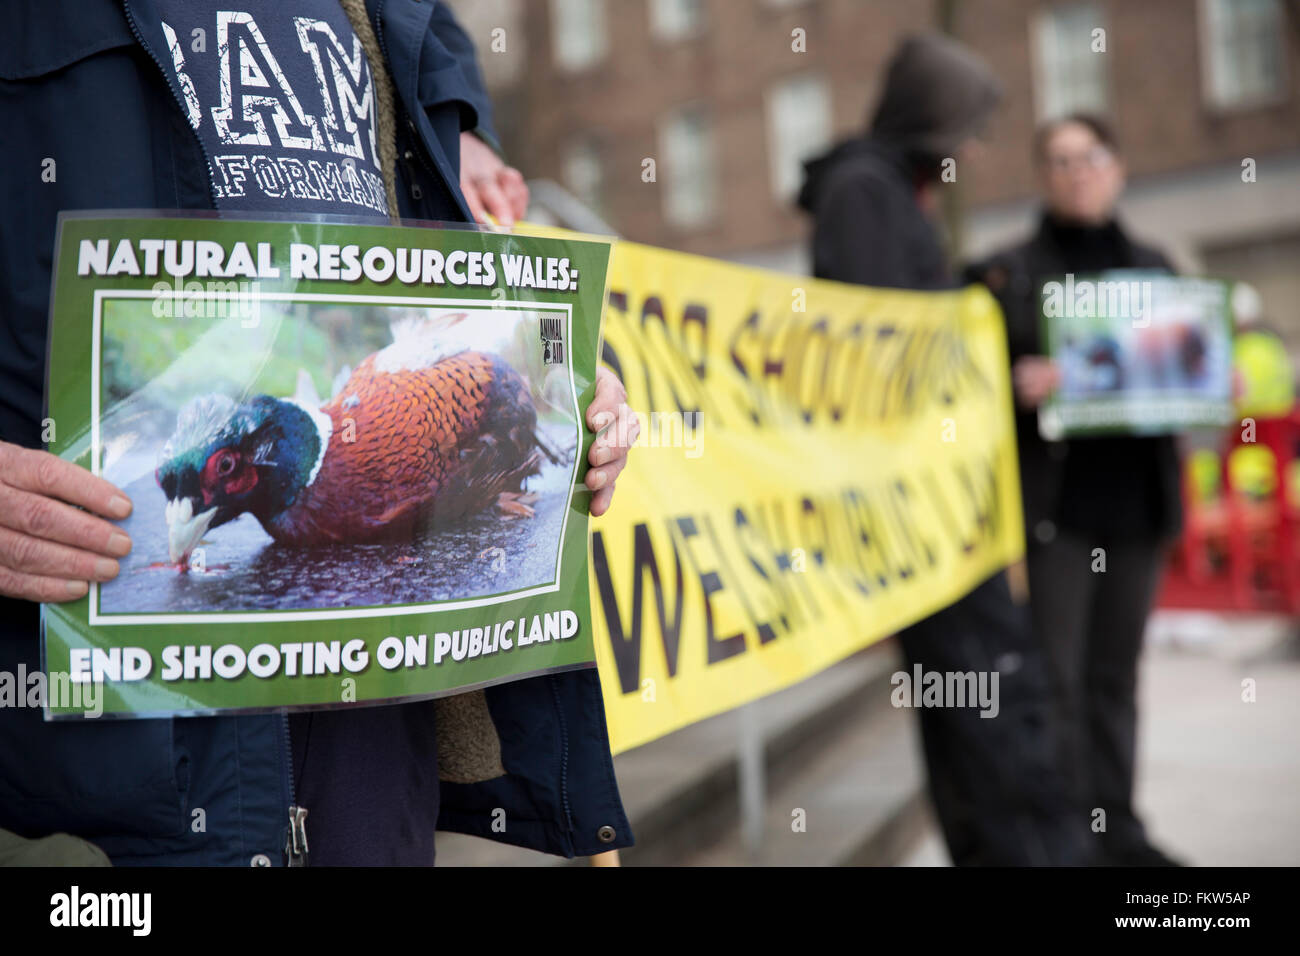 Campaigners from Animal Aid hold a protest outside the offices of Natural Resources Wales, in Cardiff, over the lease of public land for the shooting of pheasants and other birds Stock Photo